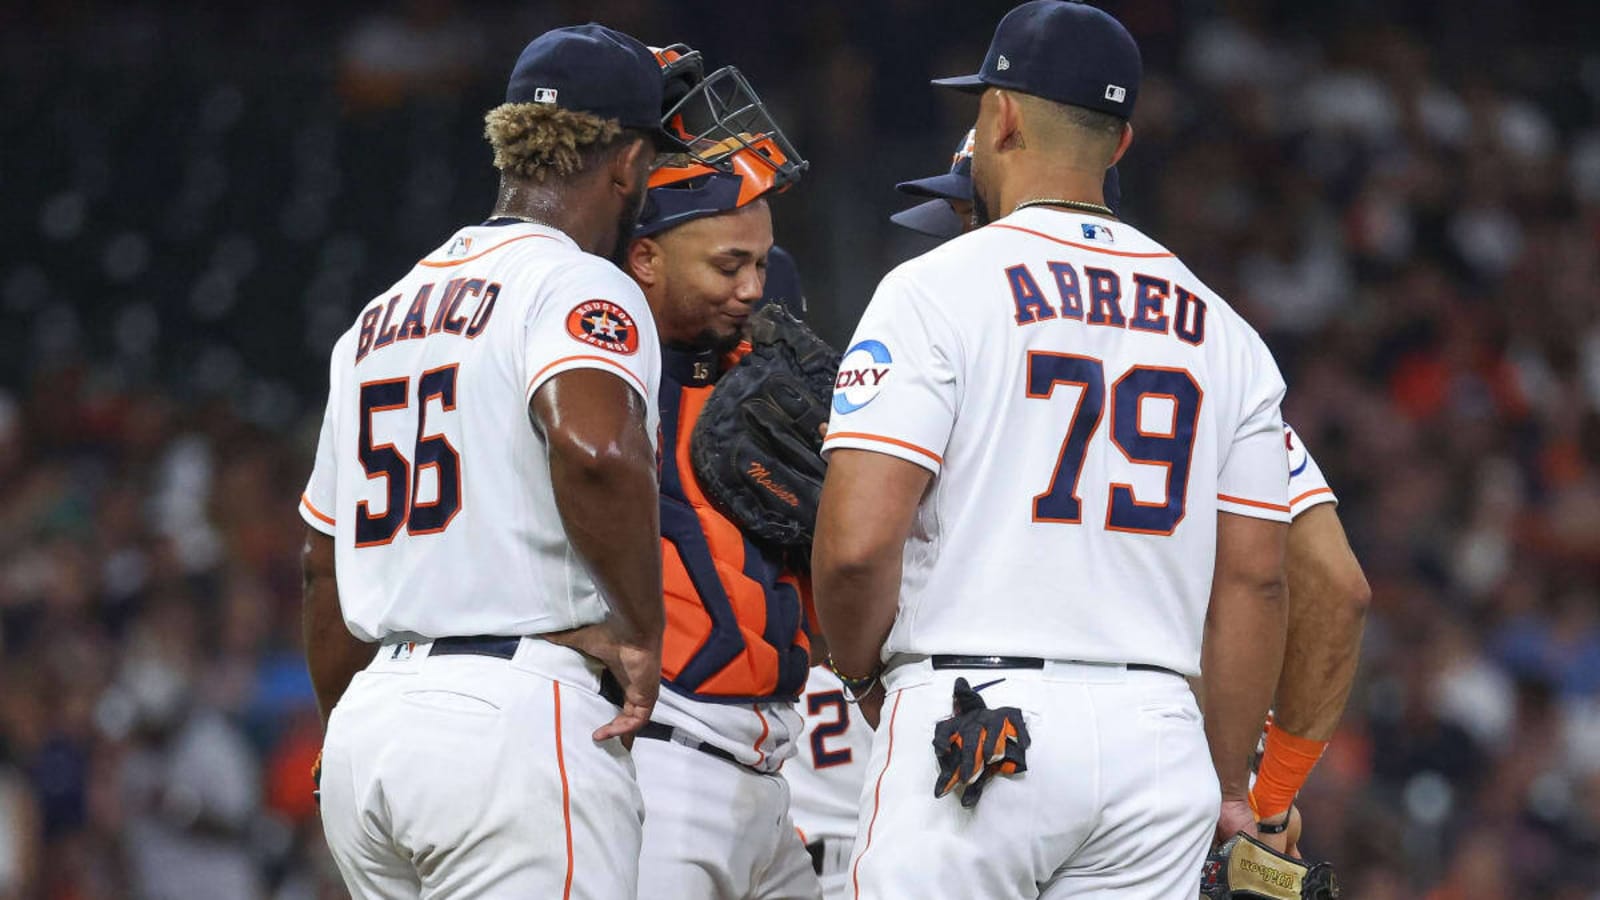 Astros Make Much Needed Roster Change Ahead of Mariners Matchup